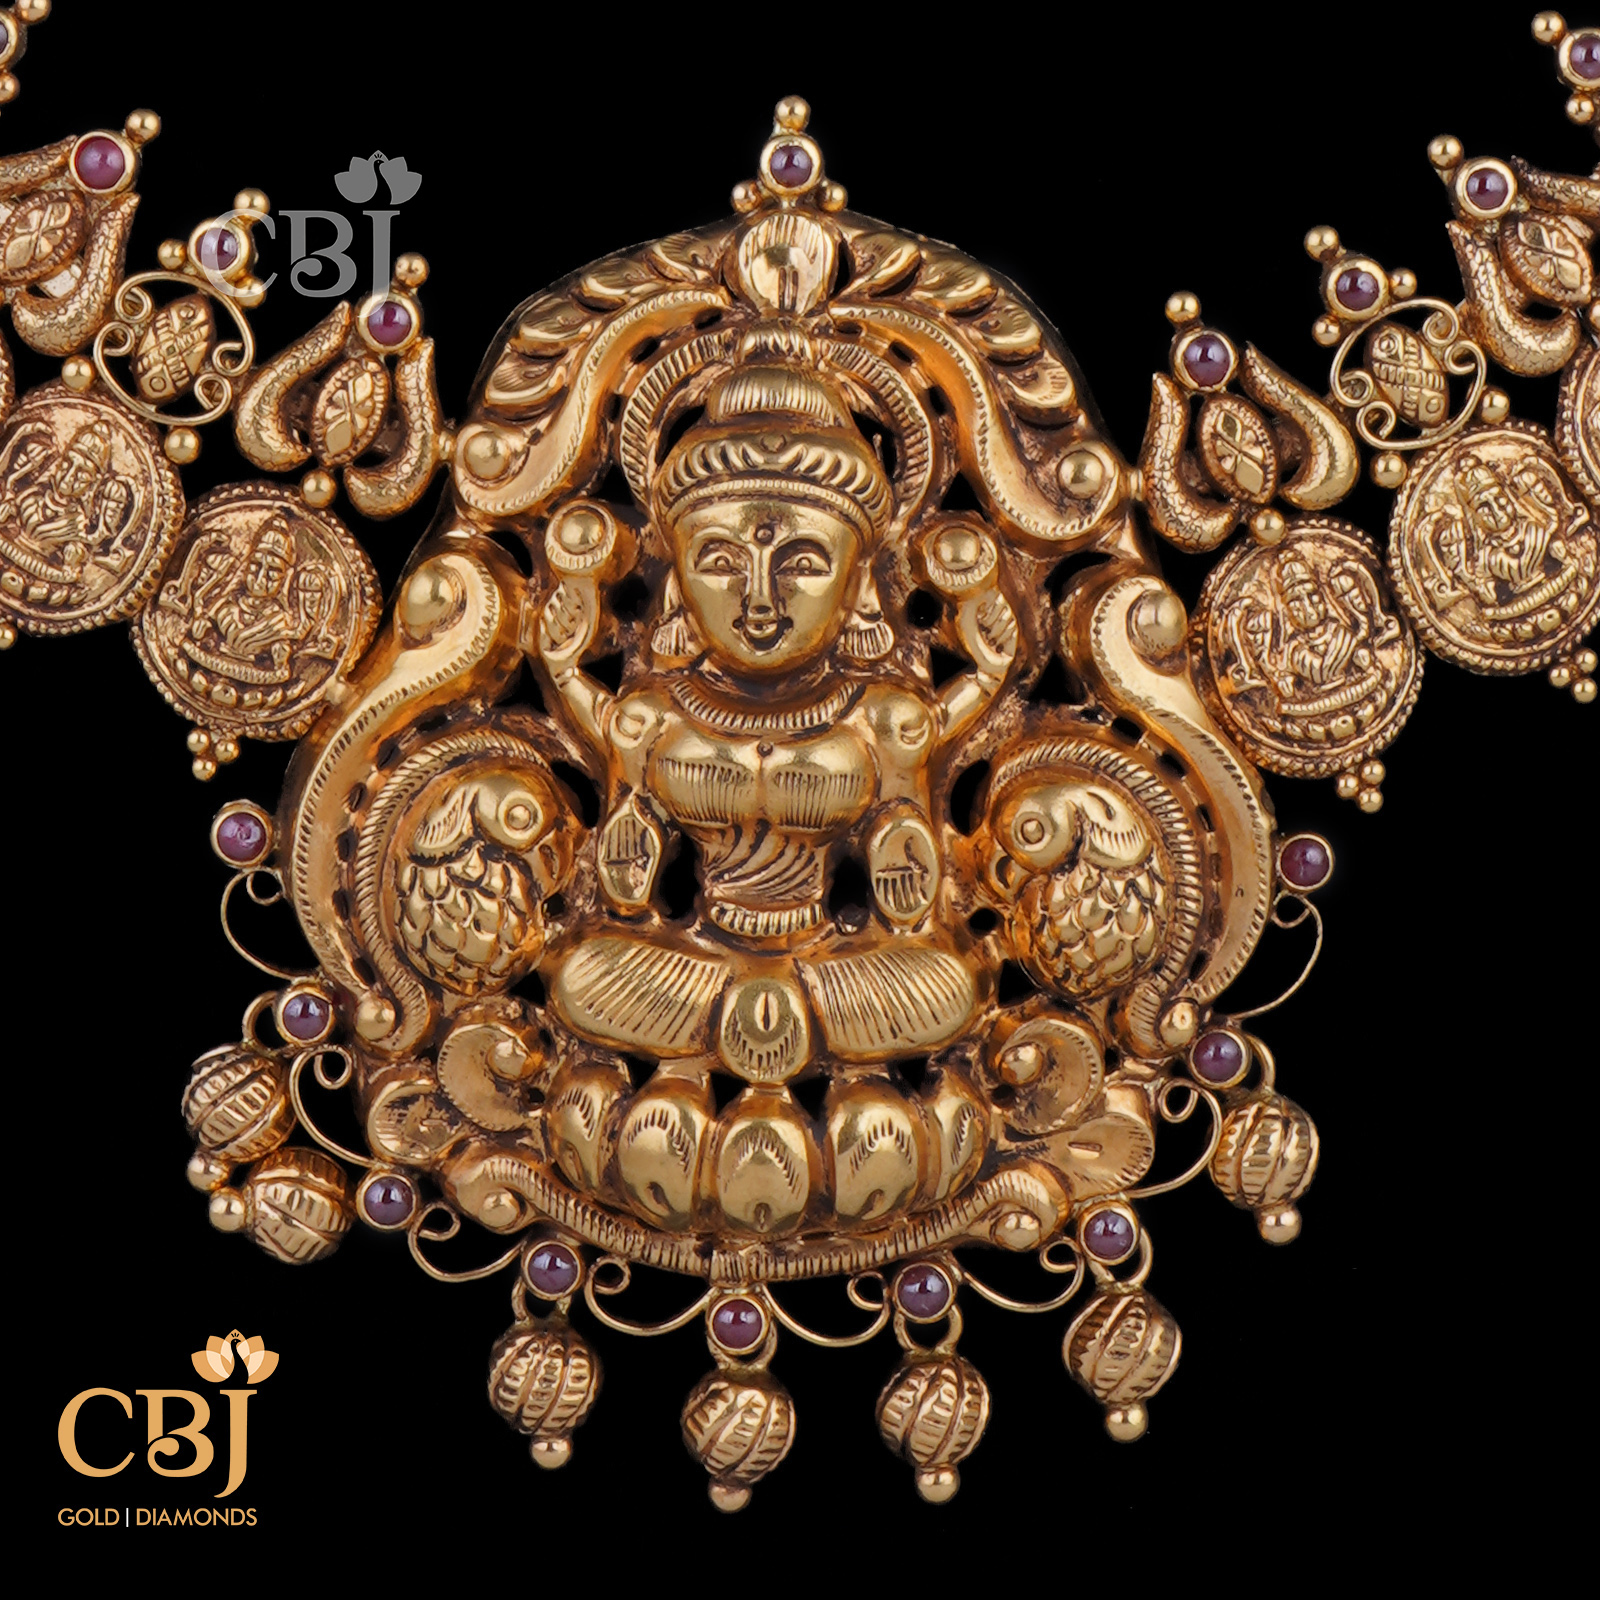 22 carat unique lakshmi kasu chandbali ear rings studded with rubies and  floral design a… | Gold earrings designs, Gold jewelry simple necklace,  Gold jewelry simple